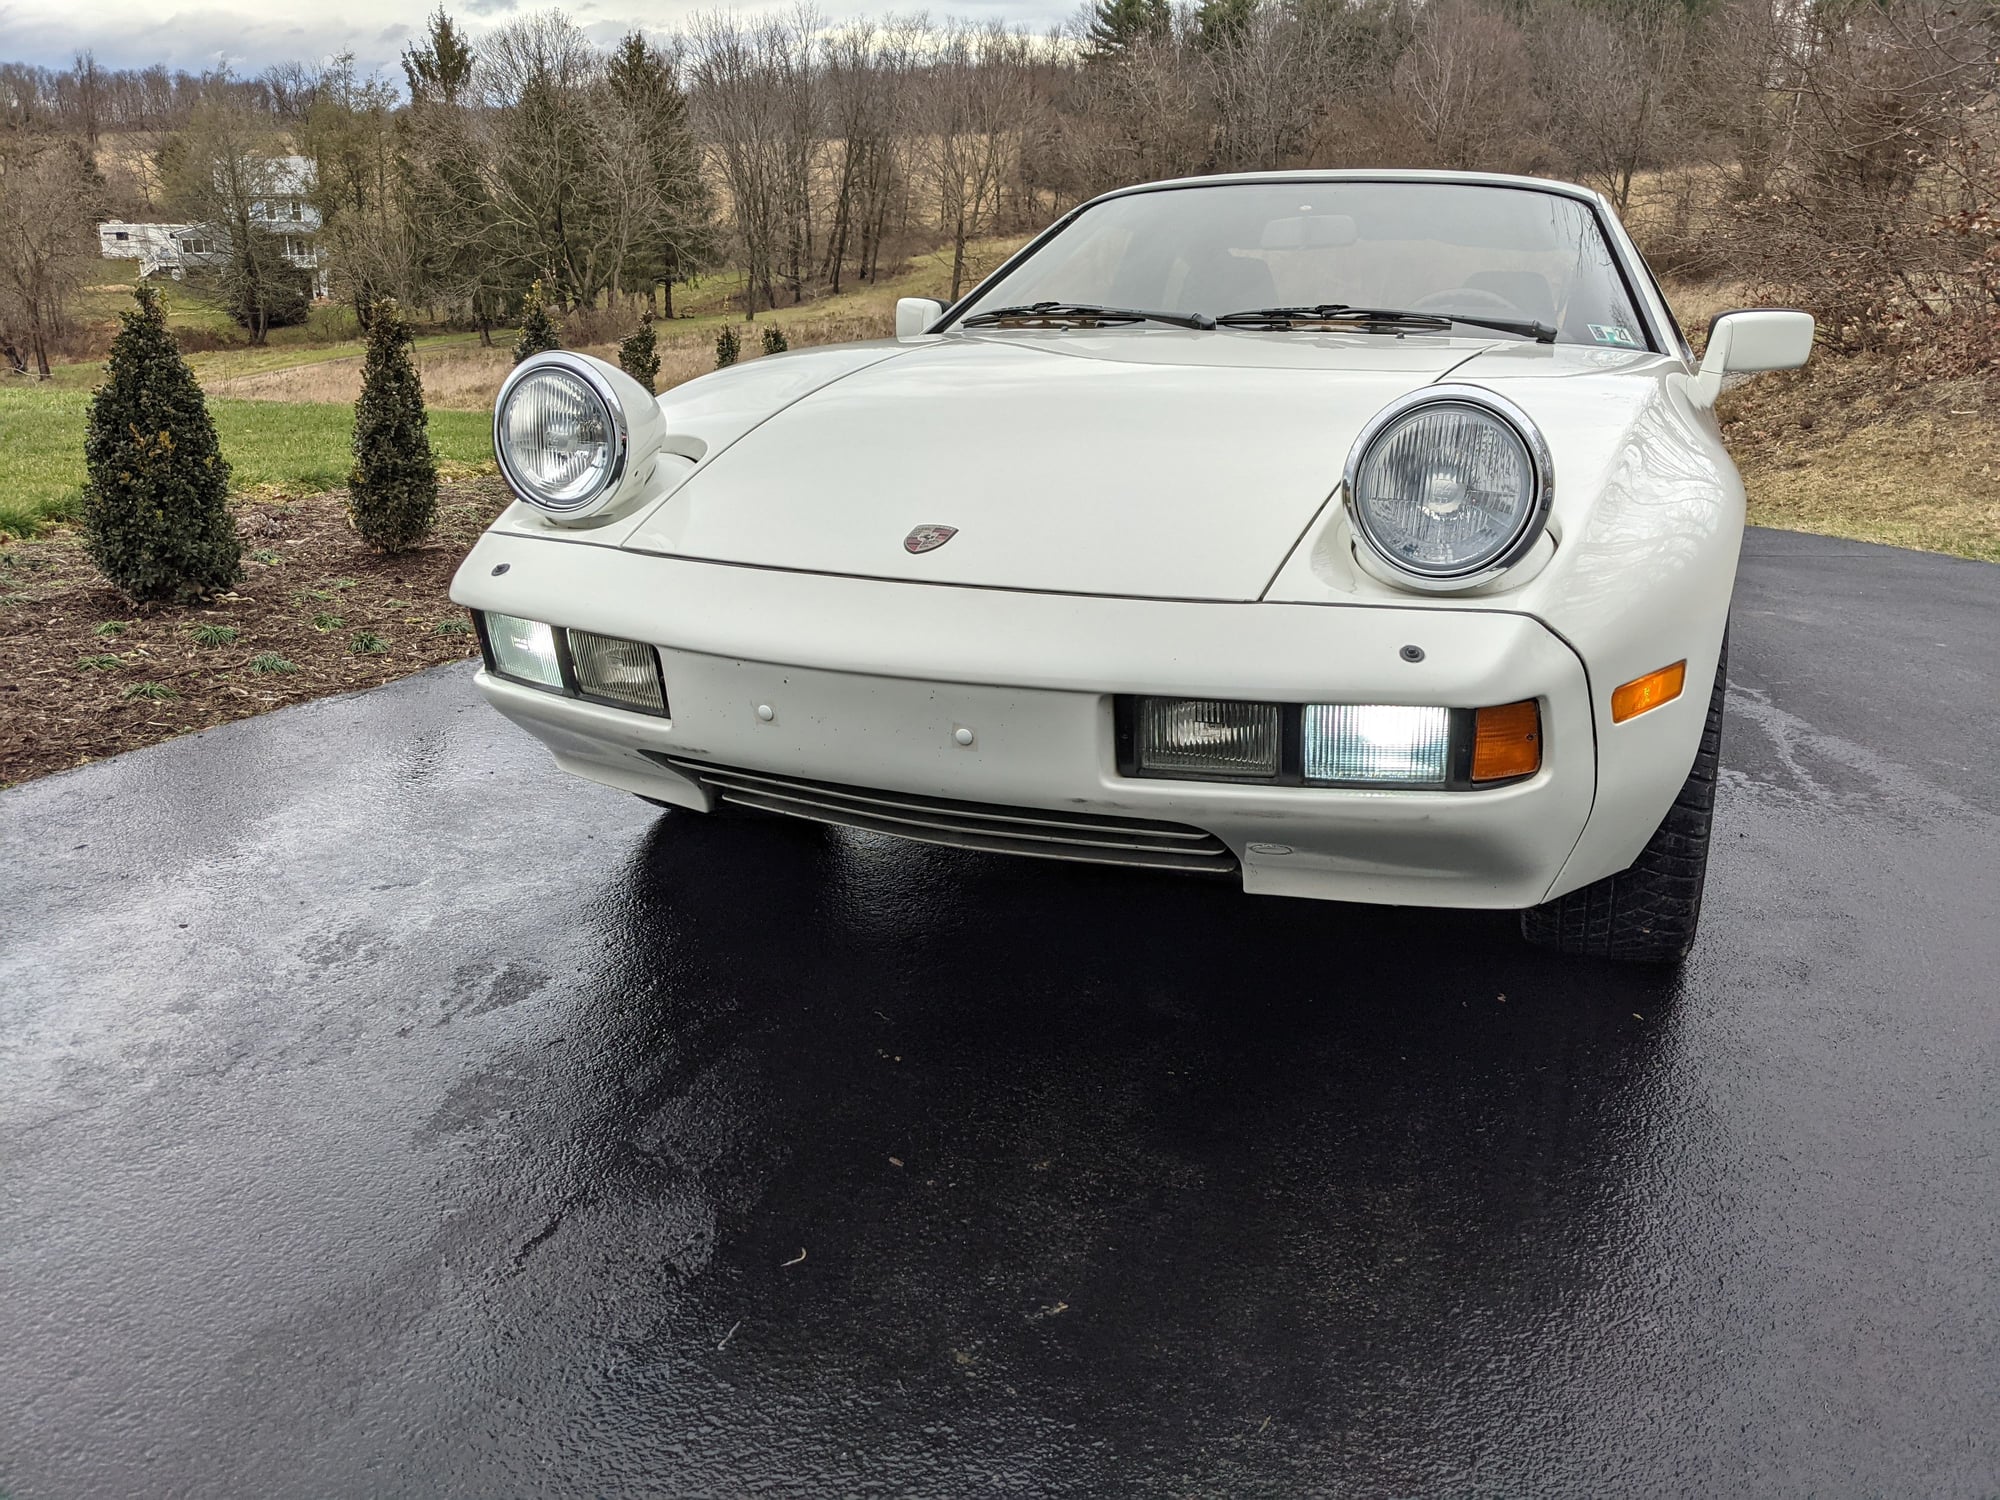 1978 Porsche 928 - 1978 928 5-spd LSD - Used - VIN 9288200576 - 78,000 Miles - 8 cyl - 2WD - Manual - Coupe - White - Glen Rock, PA 17327, United States